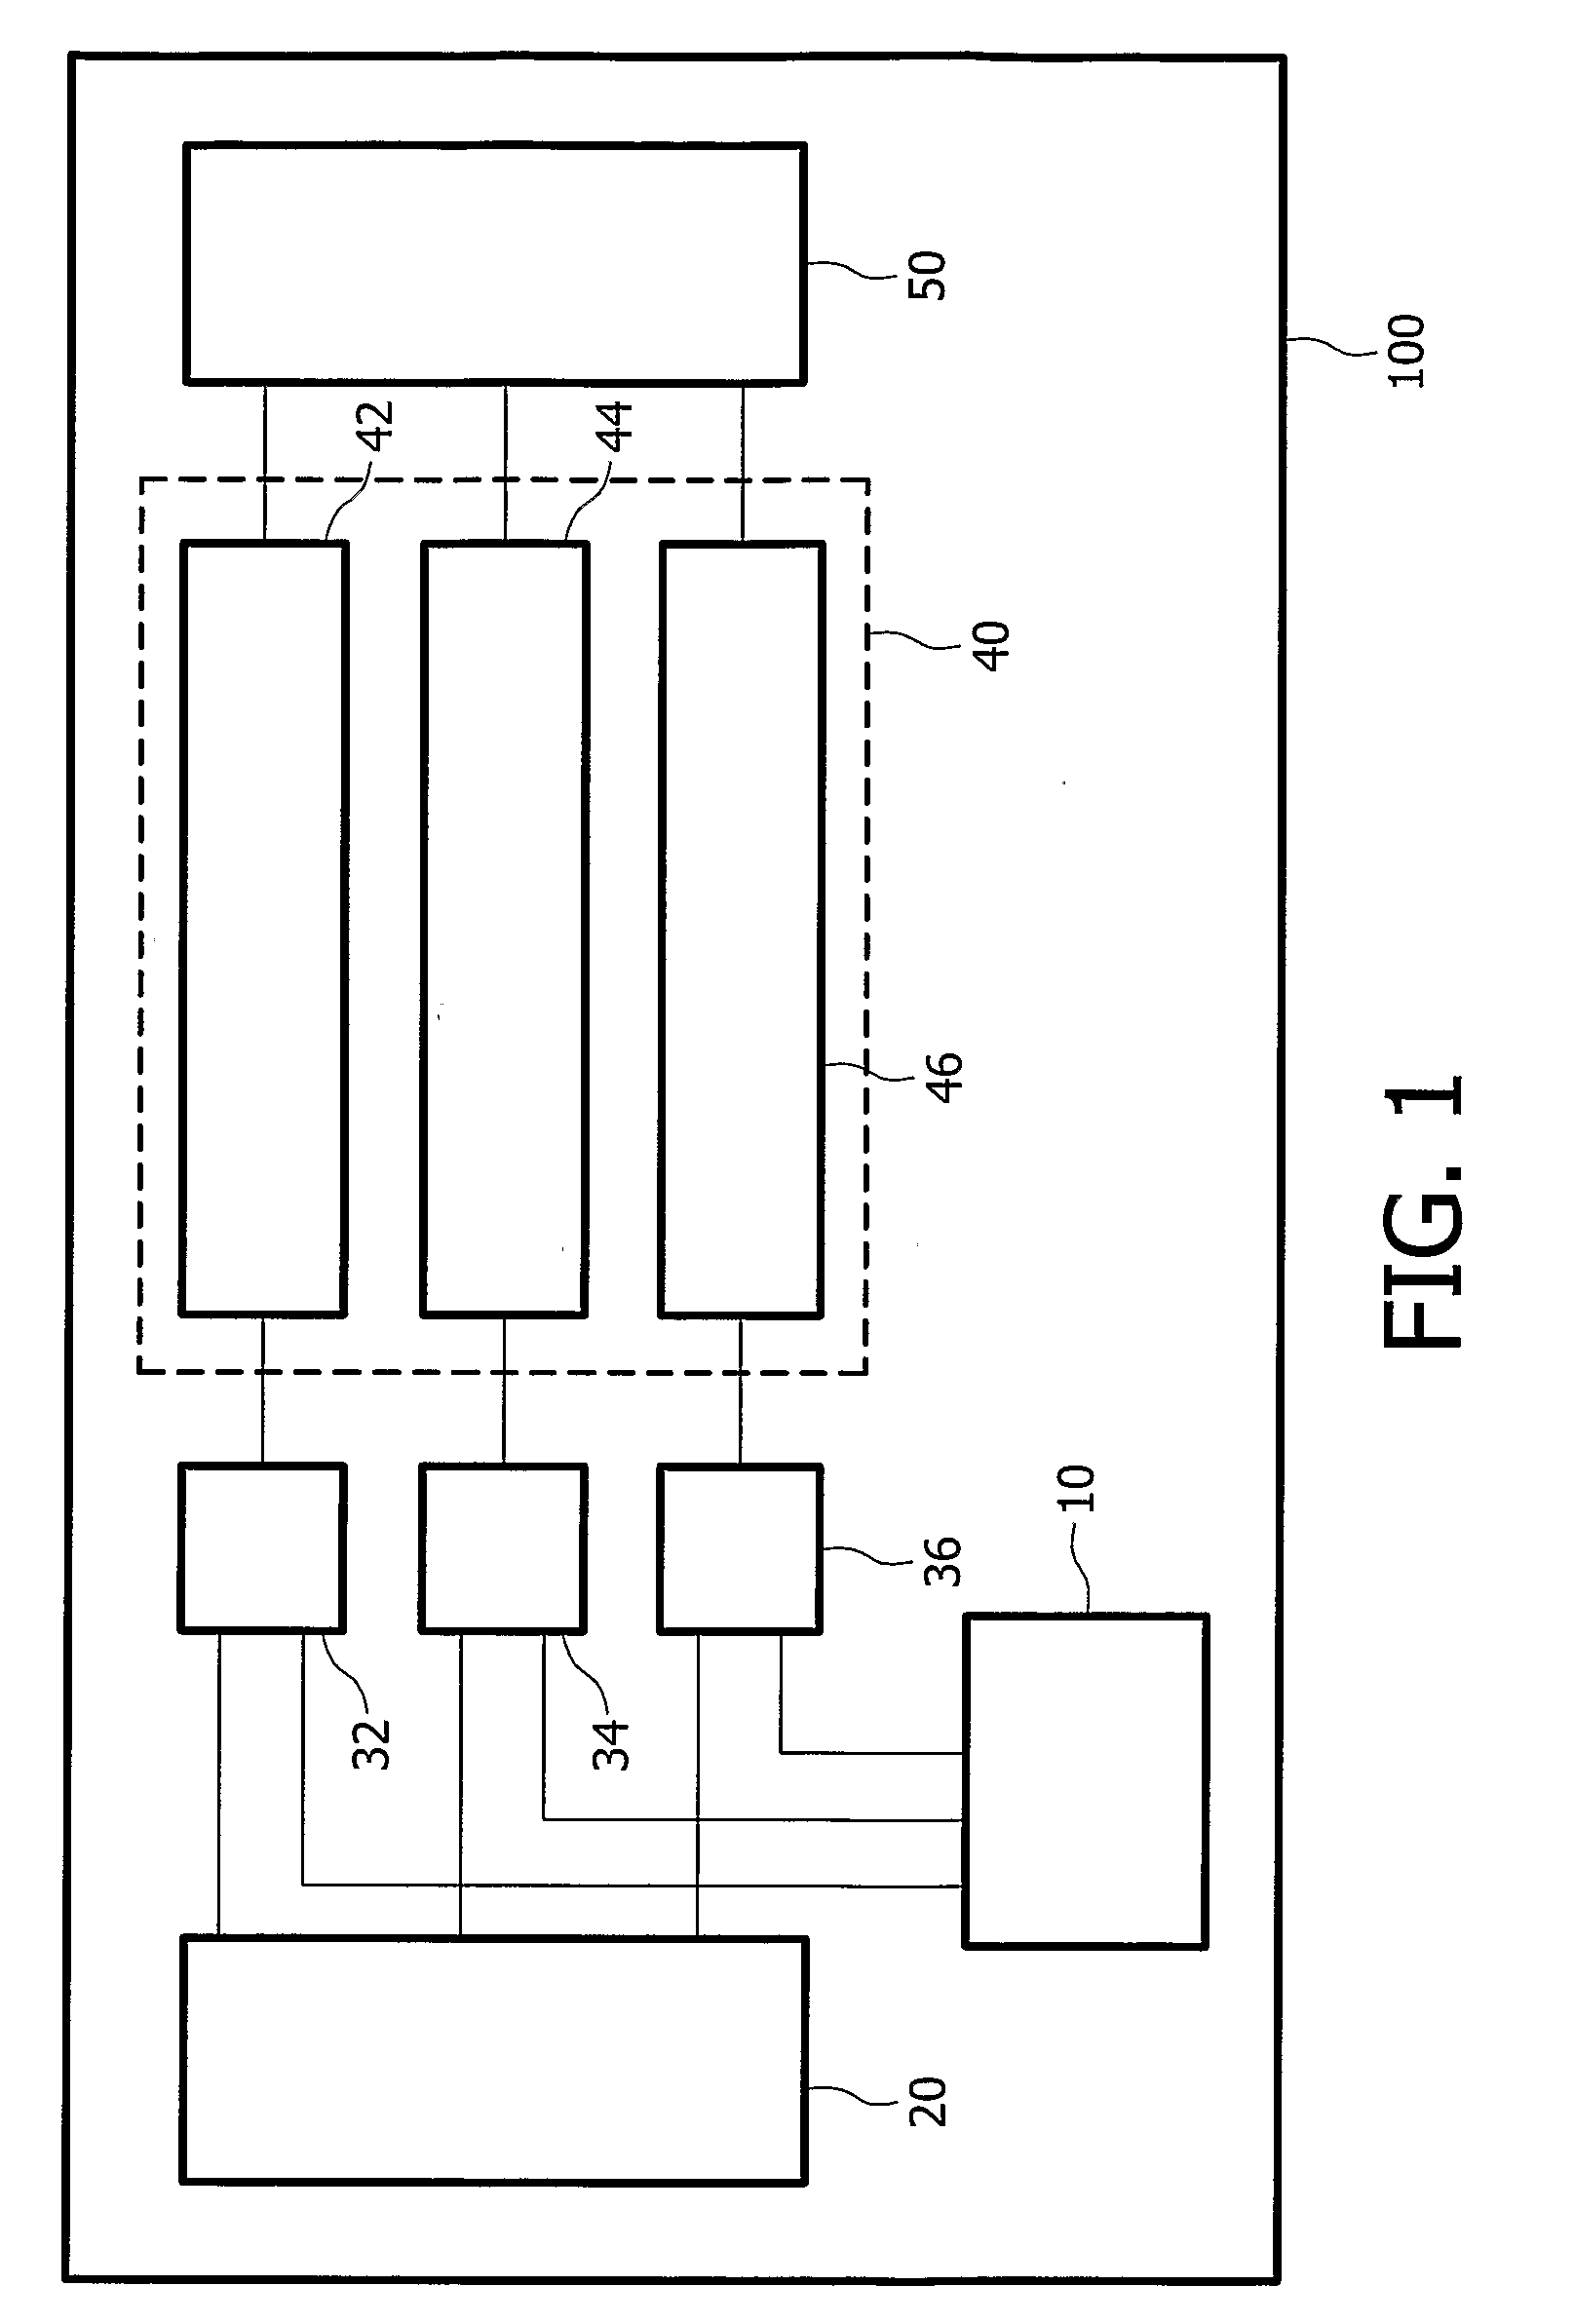 Circuit Arrangement and Method of Testing an Application Circuit Provided in Said Circuit Arrangement